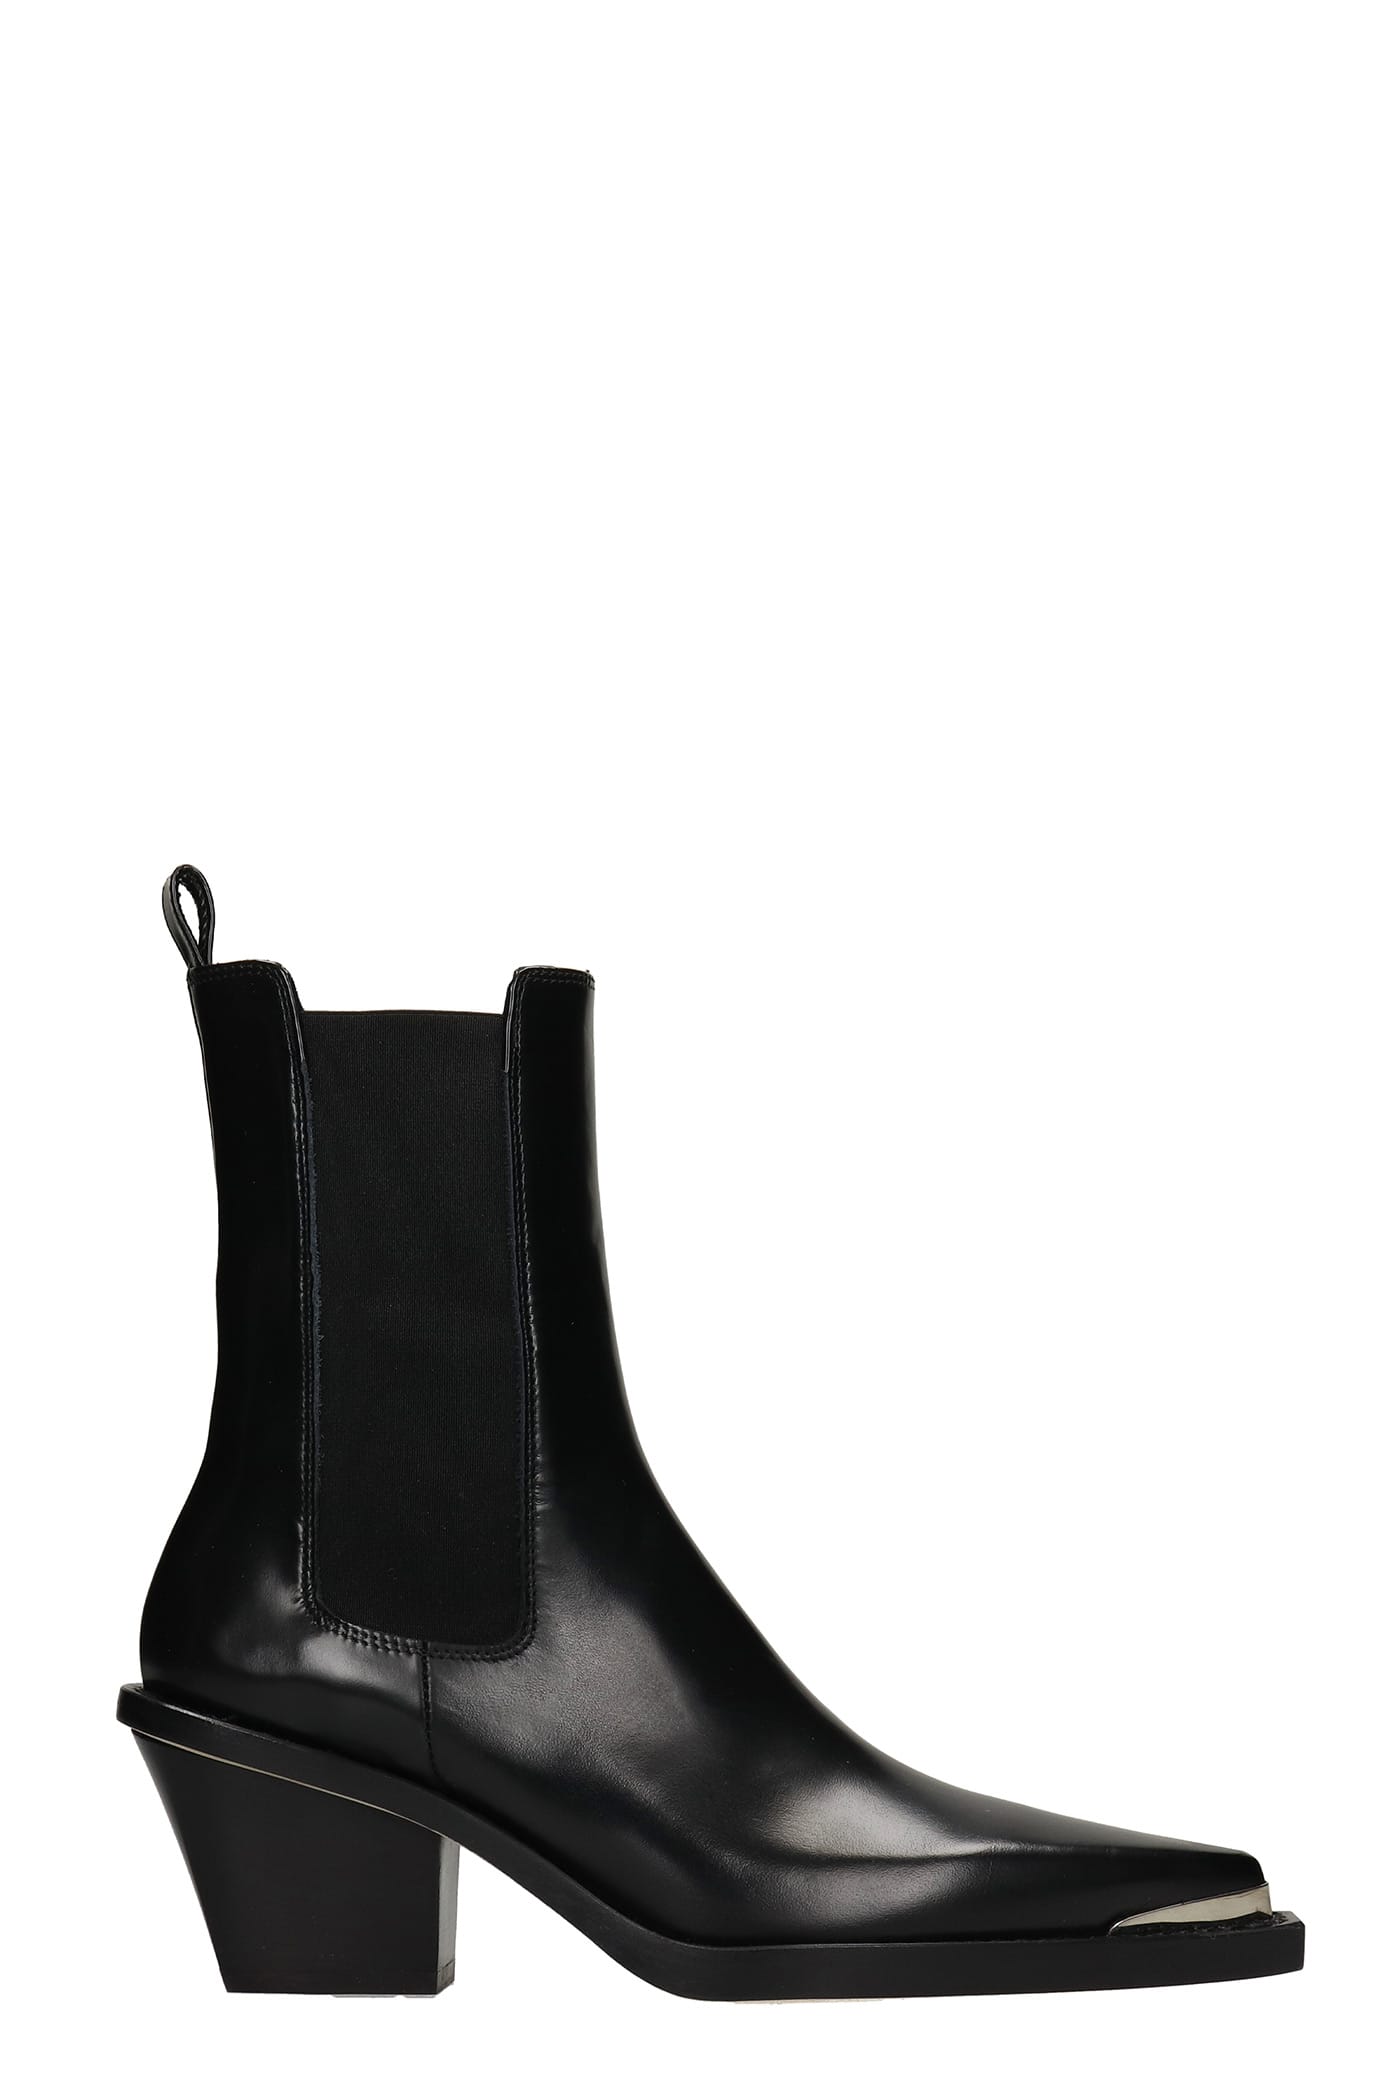 Paris Texas Dallas Metal Texan Ankle Boots In Black Leather